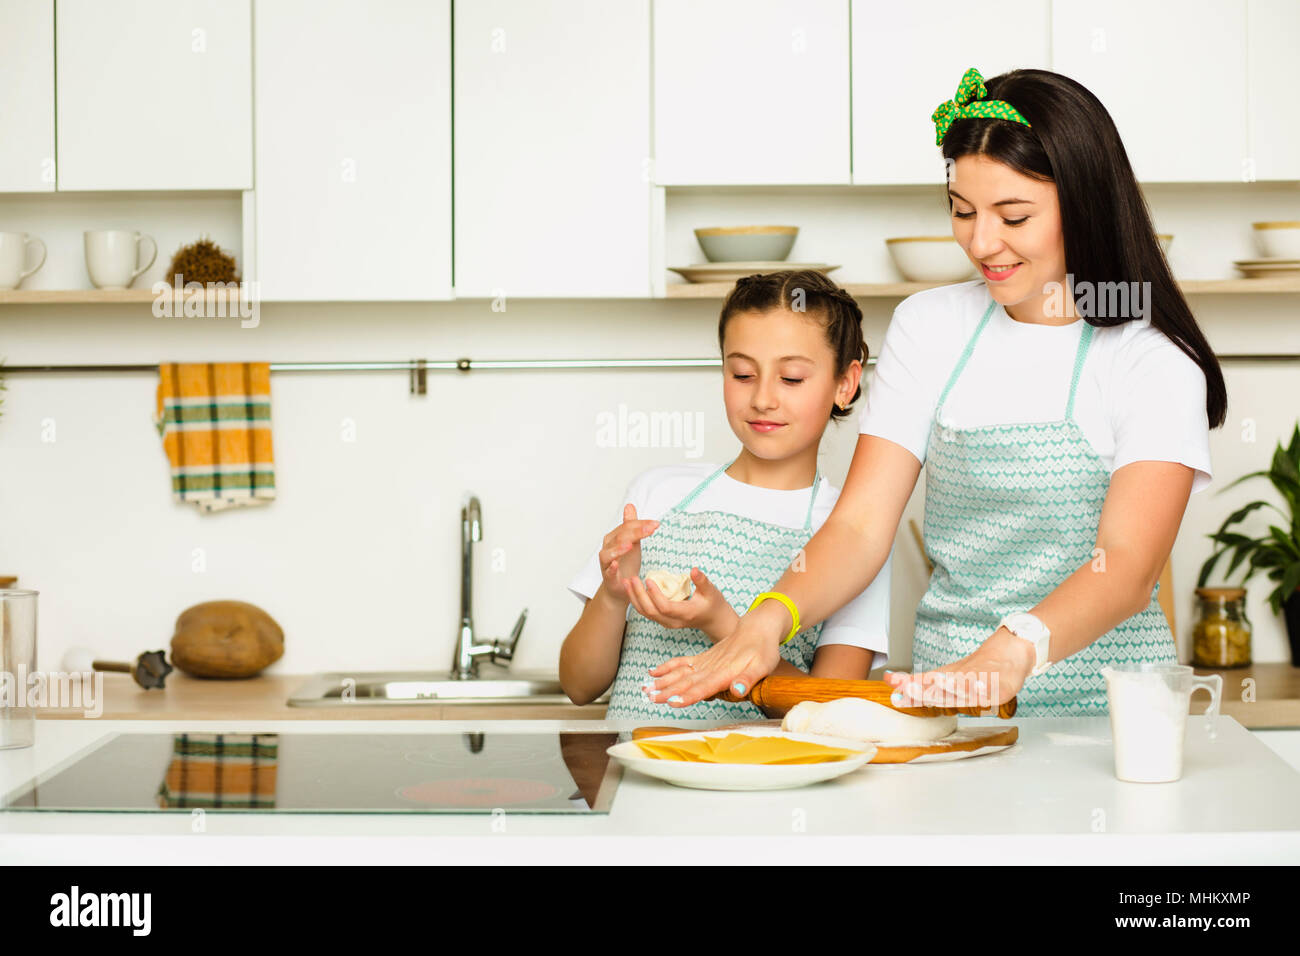 Flour and fun make for some delicious food. Shot of a pretty girl having fun baking with her mother at white kitchen Stock Photo